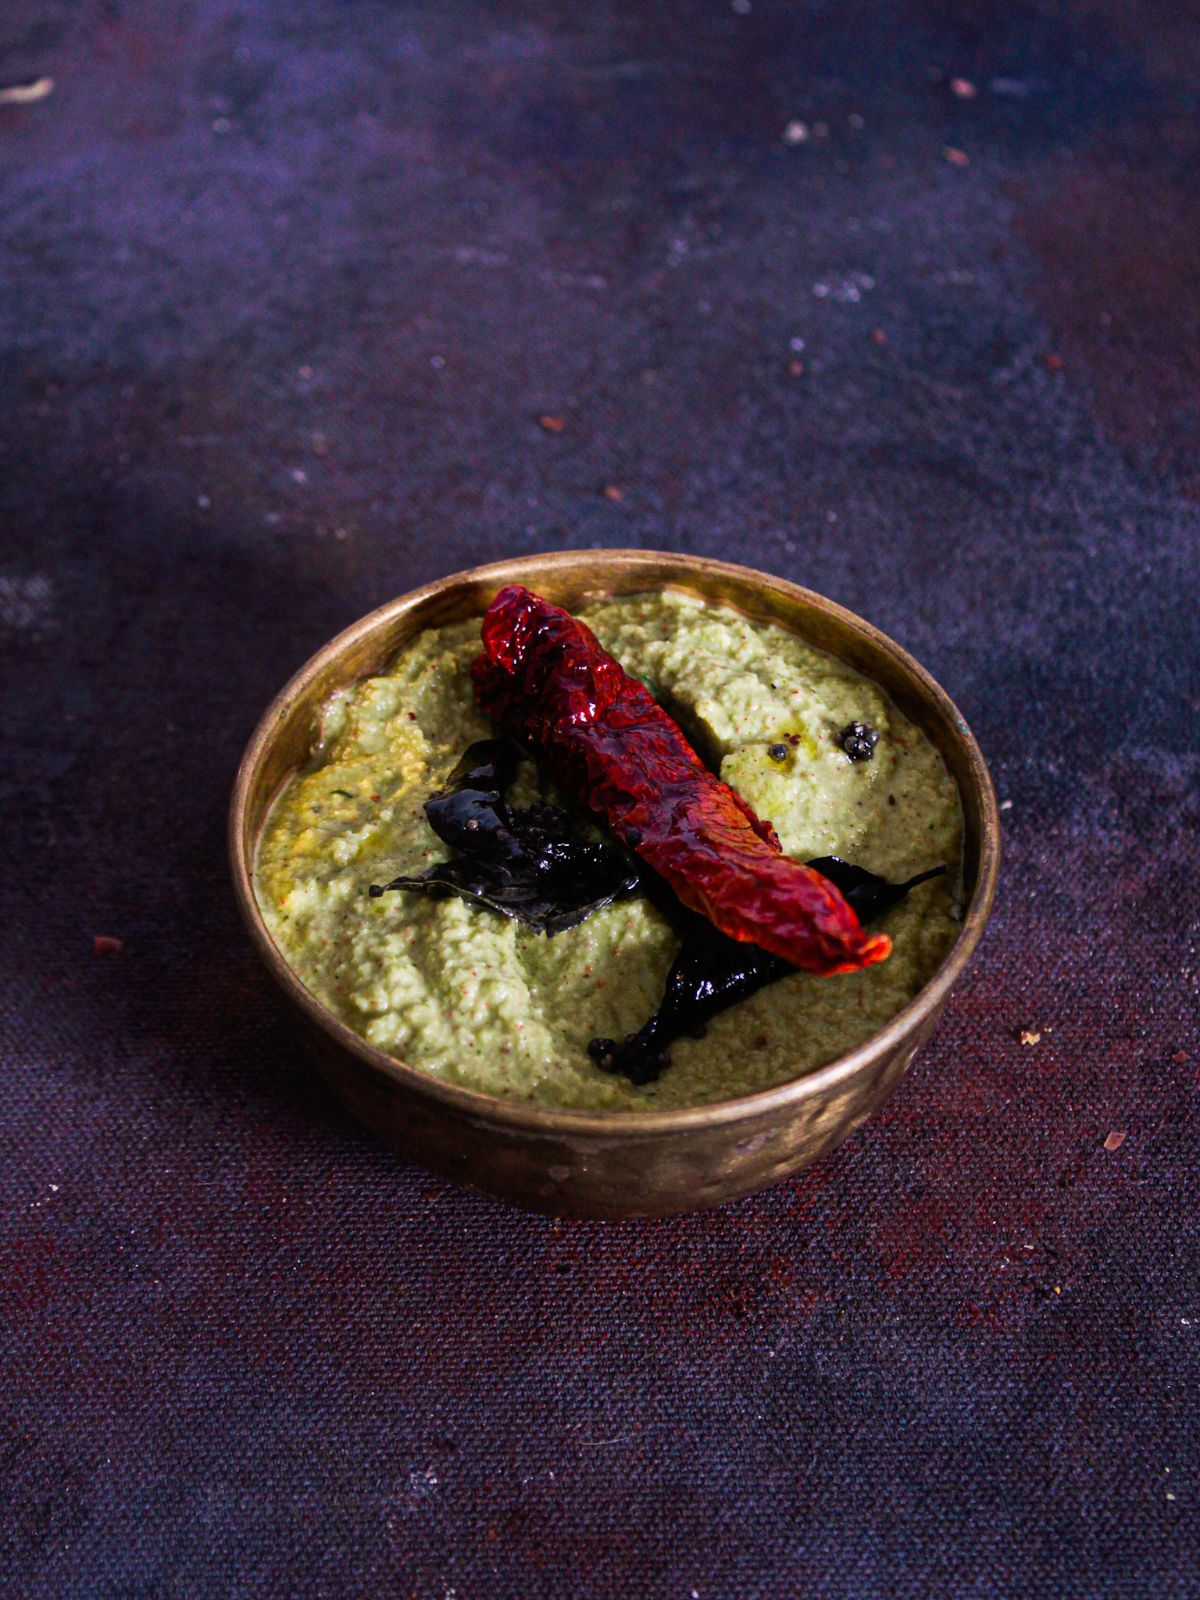 coconut coriander chutney in gold bowl on purple table with red chile on top